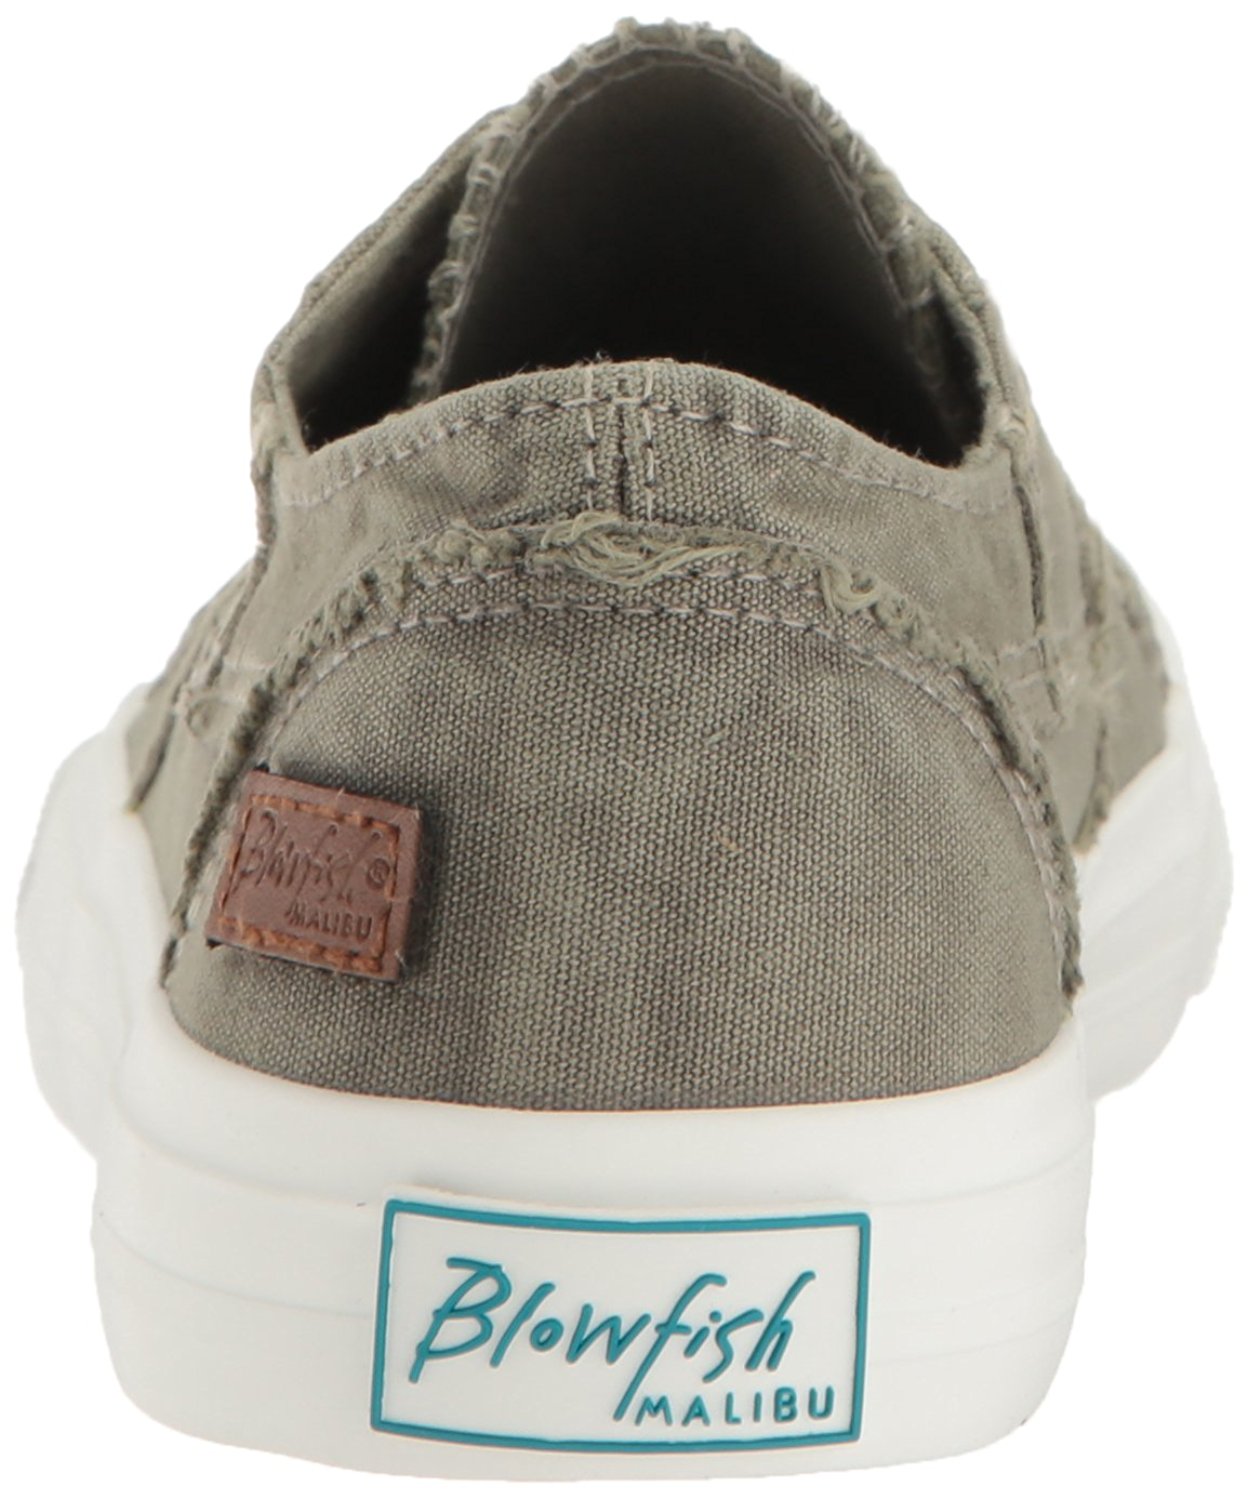 Blowfish Womens Marley Low Top Bungee Fashion Sneakers, Grey, Size 8.5 zWnp | eBay